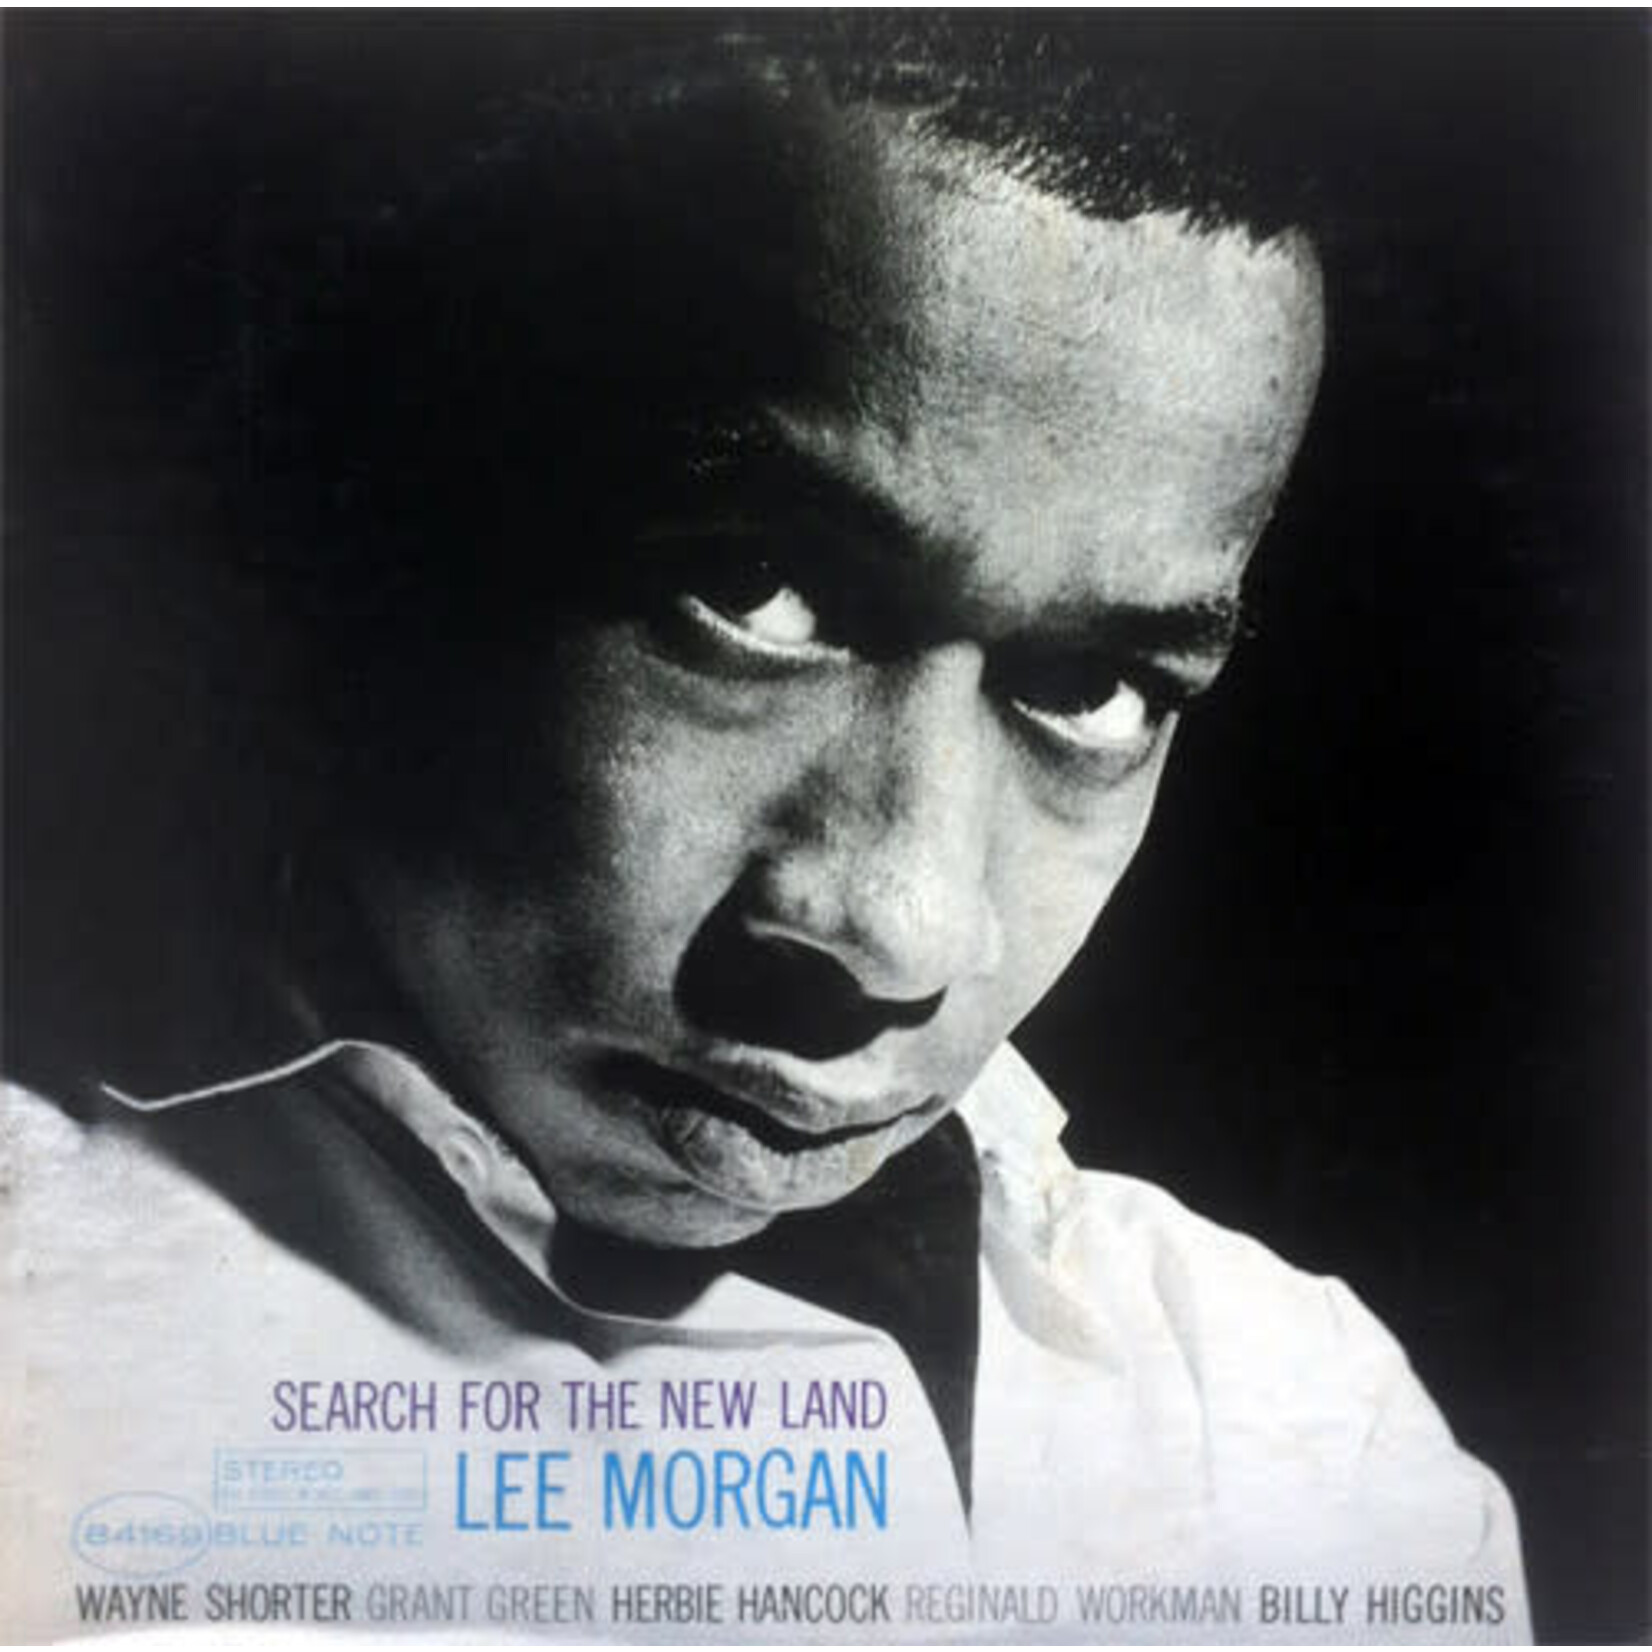 [New] Morgan, Lee: Search For The New Land (Blue Note Classic Vinyl Series) [BLUE NOTE]